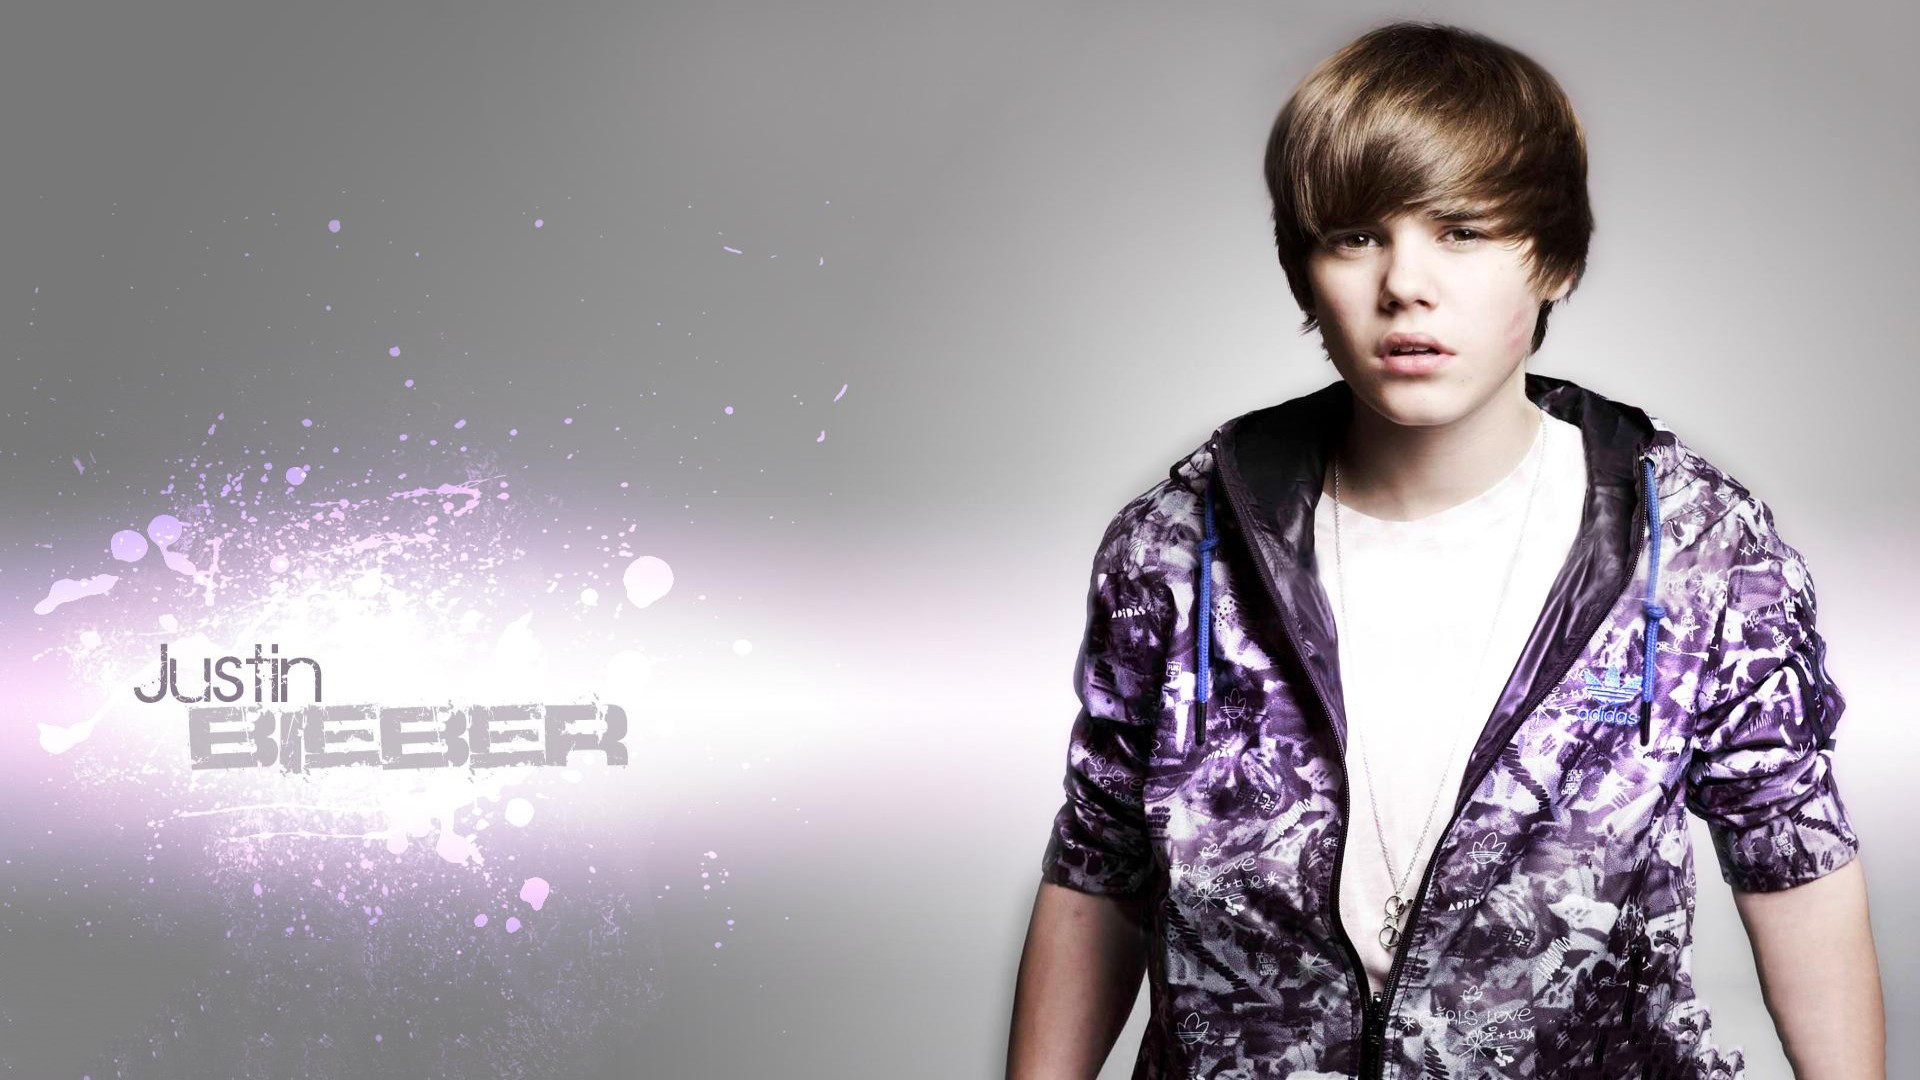 1920x1080 Cool Justin Bieber Backgrounds Images Download.